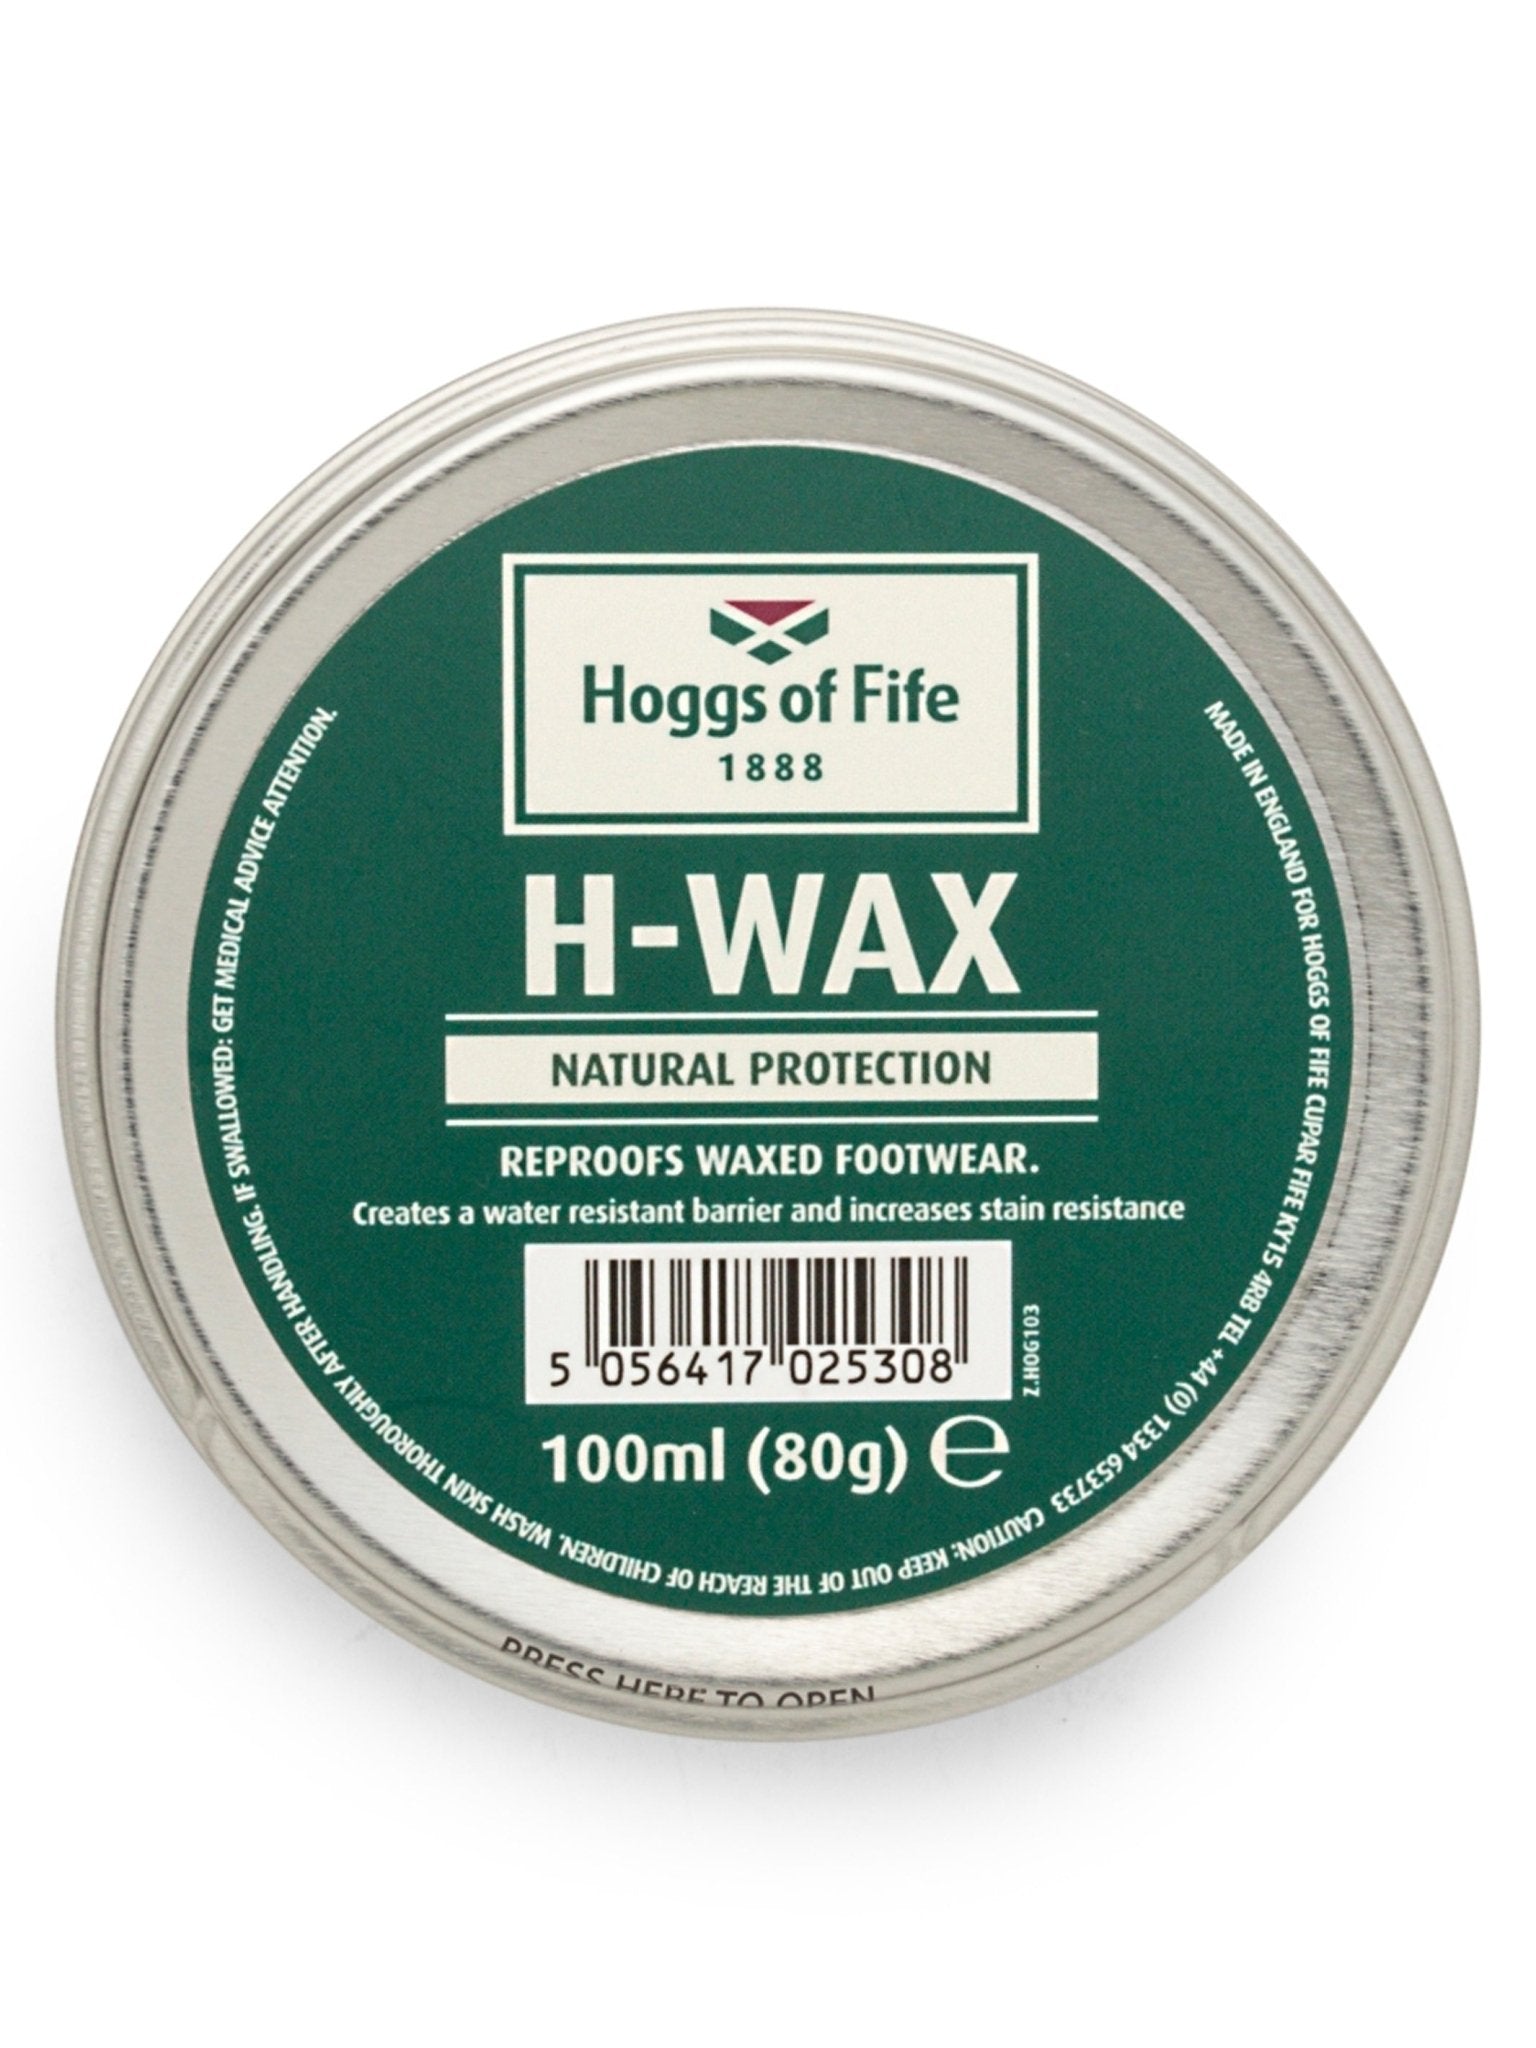 Hoggs of Fife Hoggs of Fife - H - Wax Reproof protection Waxed Shoe care / Footwear Protection - 100ml Shoe & Clothing Care